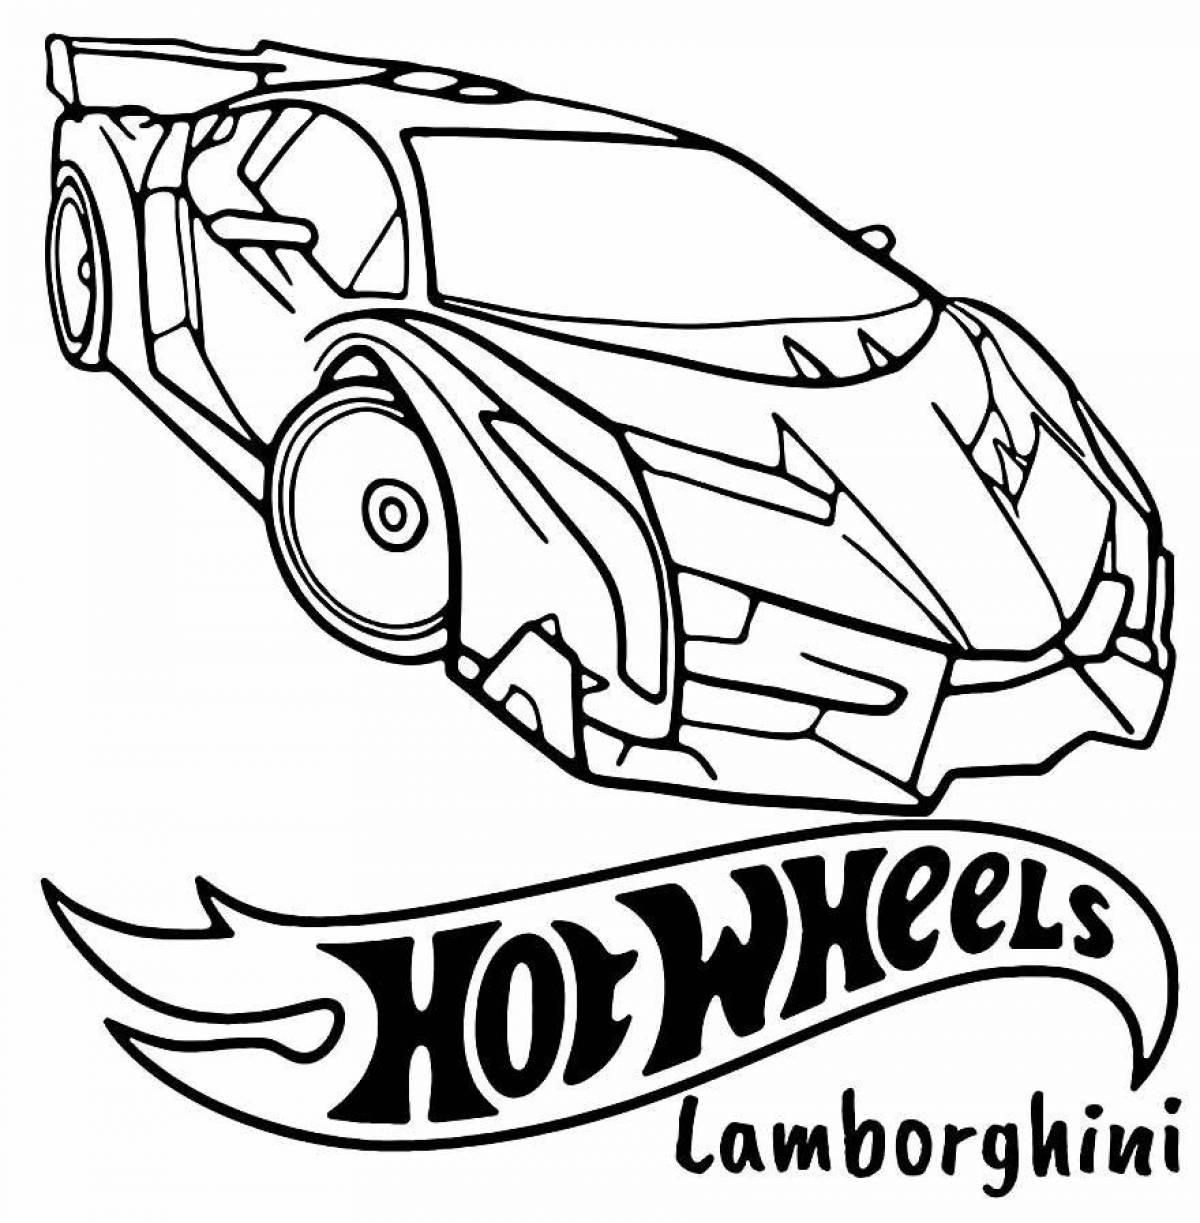 Adorable hot wheels coloring book for kids